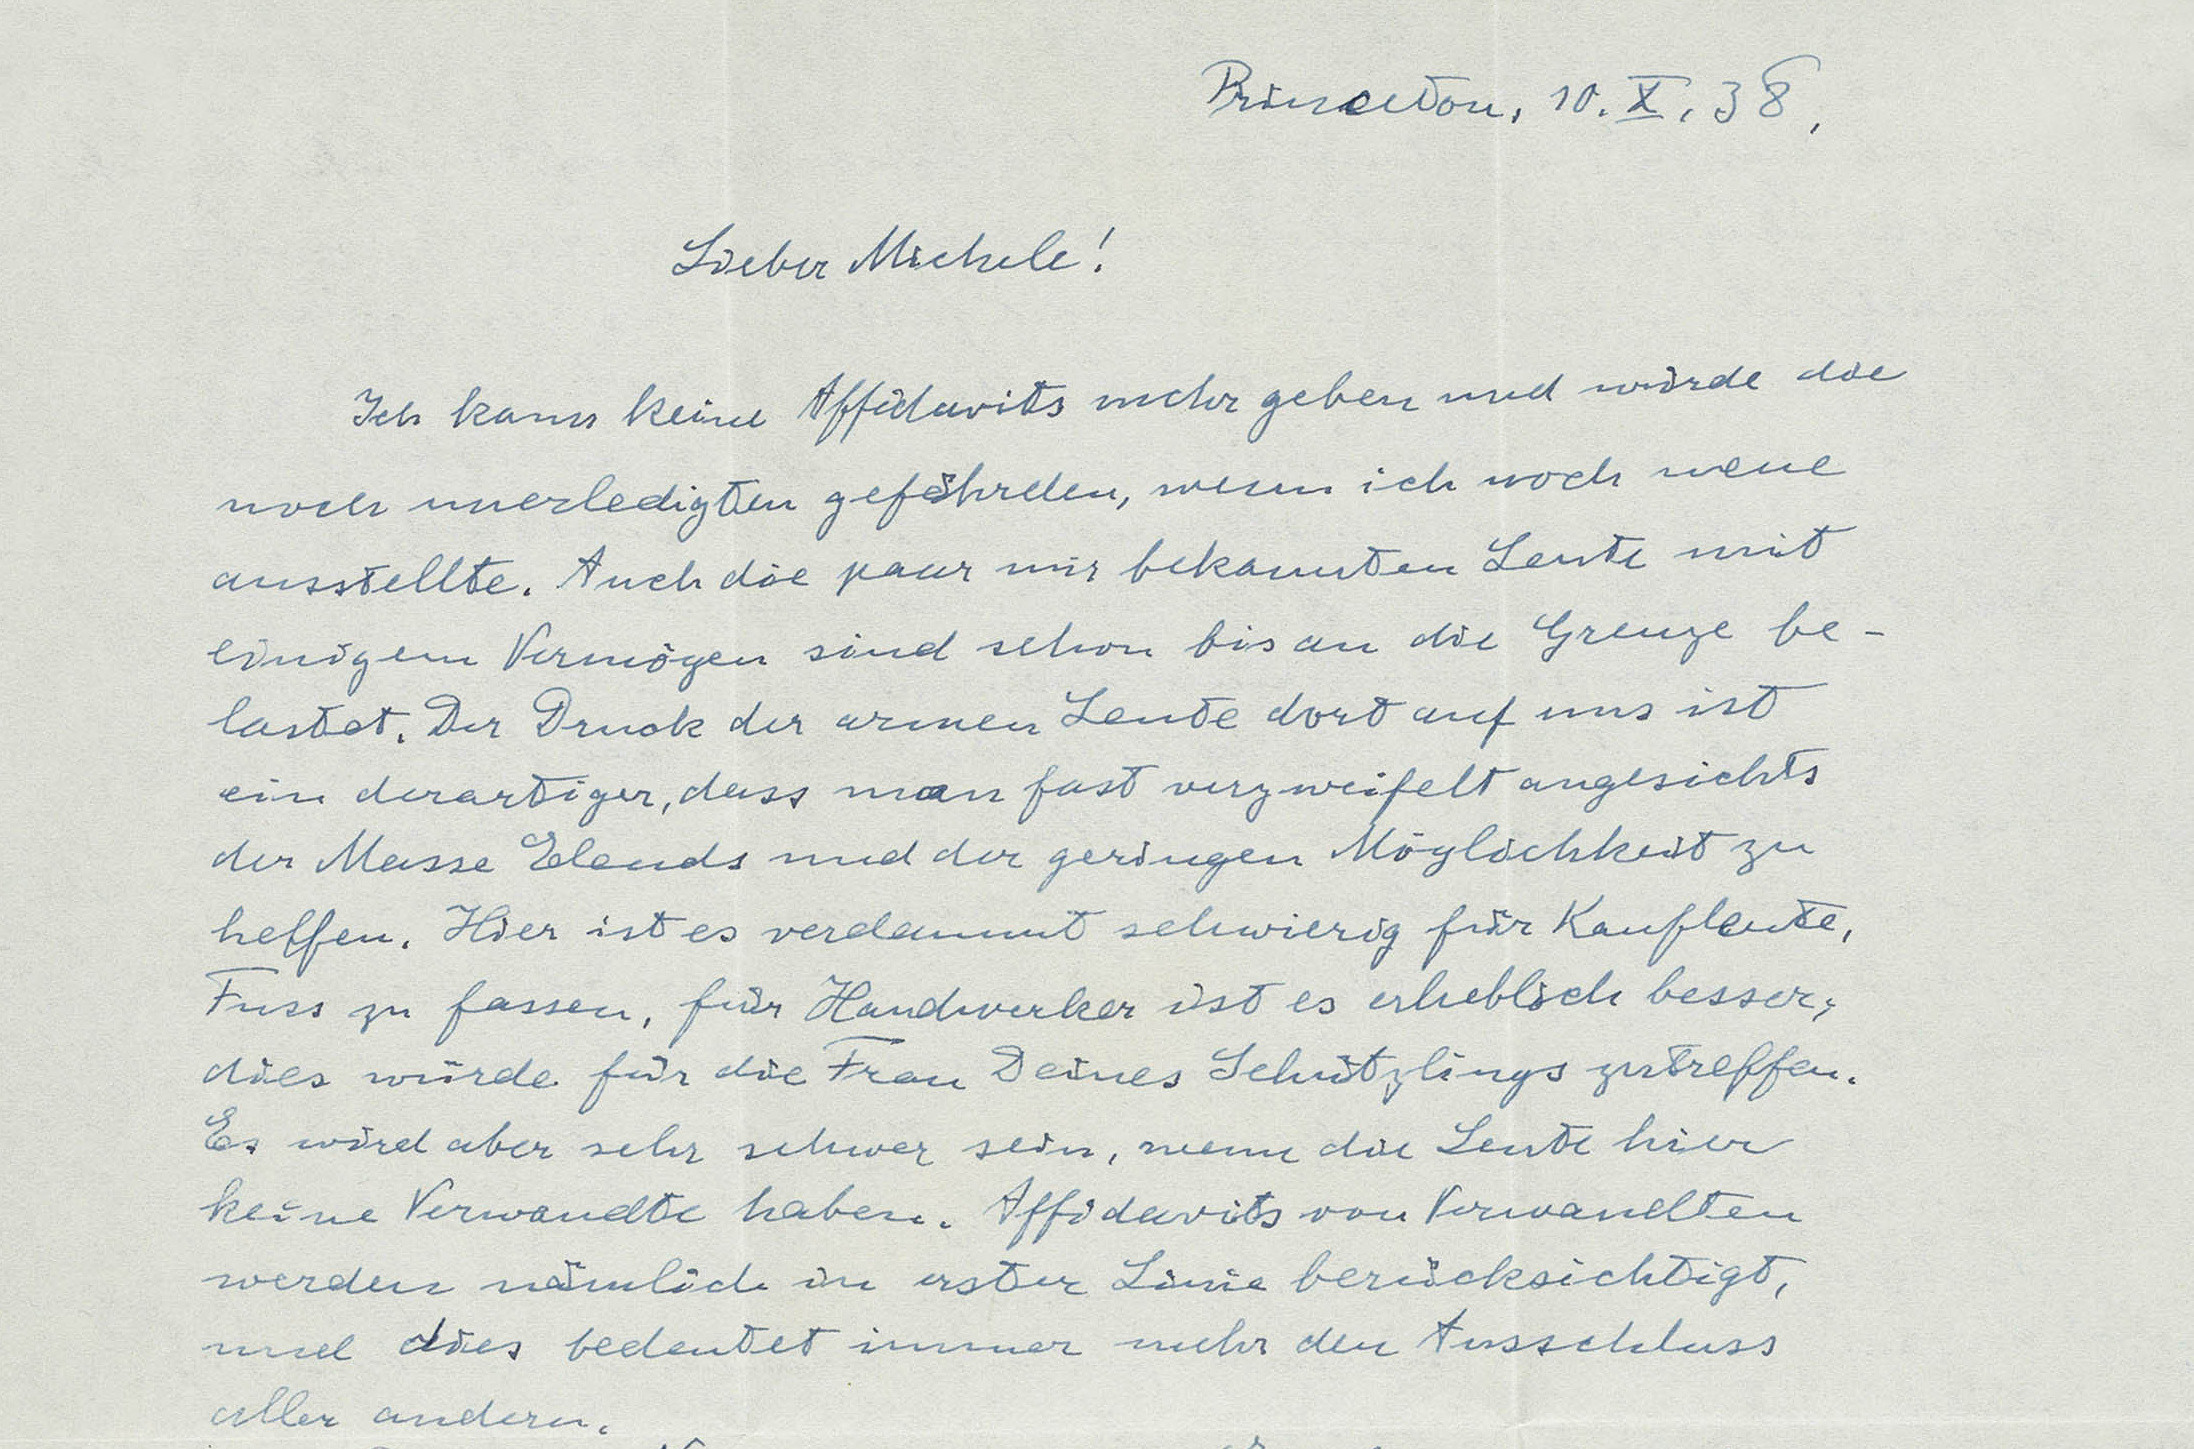 A letter written by Albert Einstein on October 10, 1938 featuring his fears for Europe following the 1938 Munich Agreement (Nate D. Sanders Auctions)